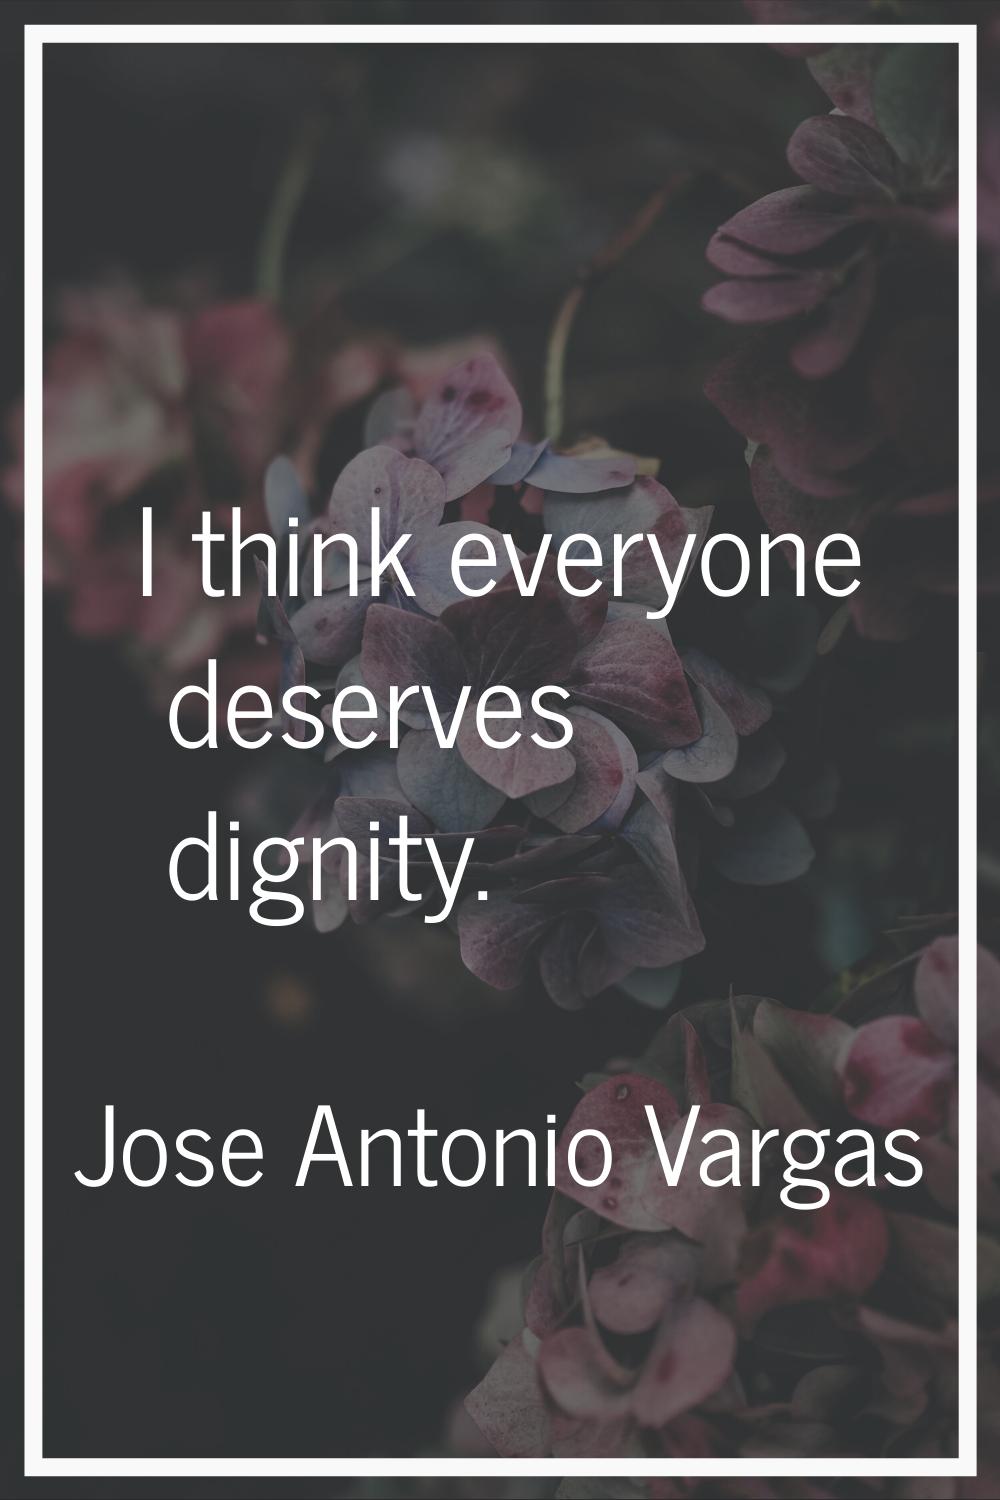 I think everyone deserves dignity.